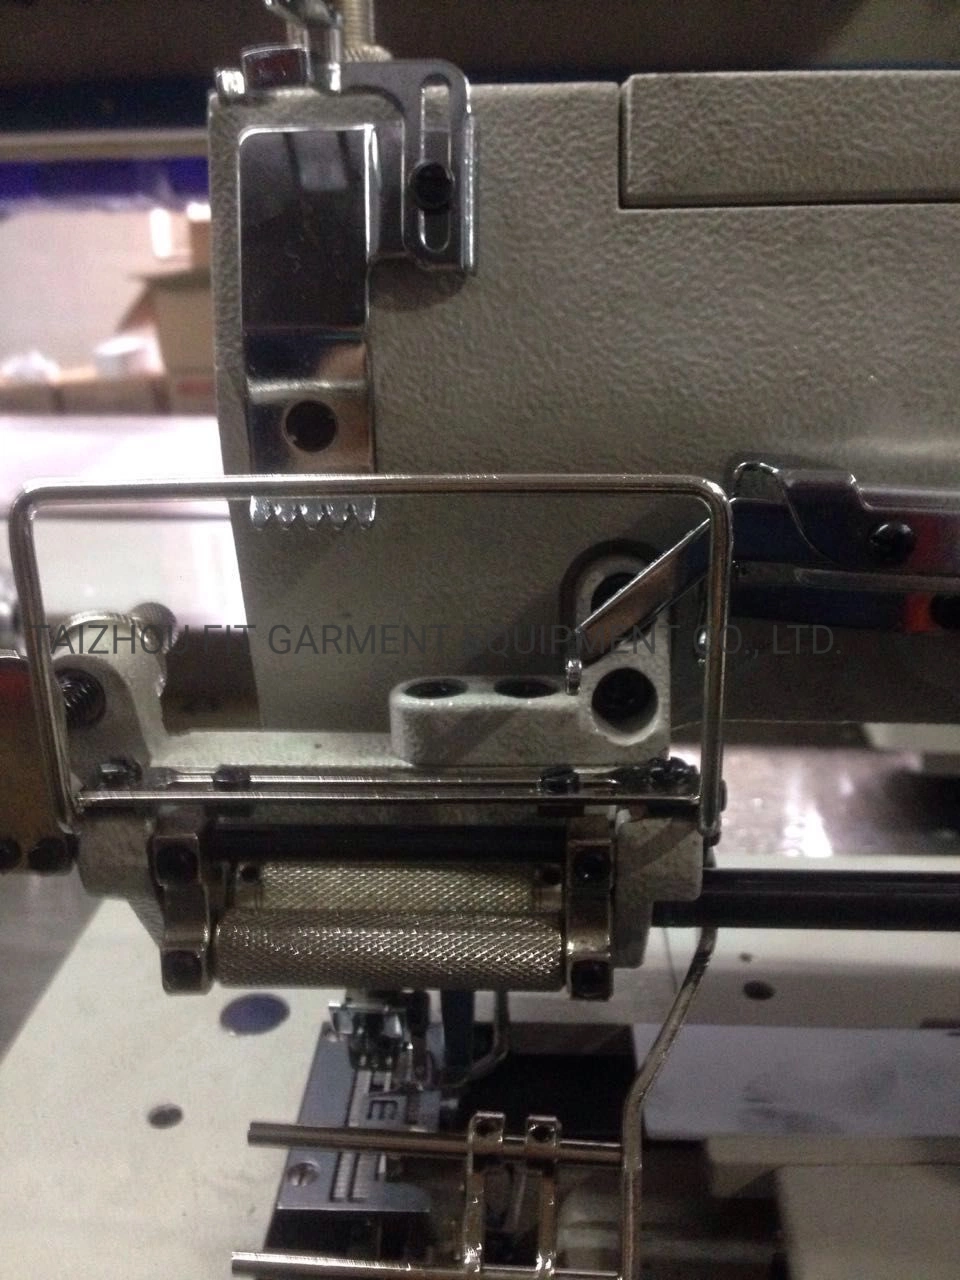 Direct Drive Flat Bed Interlock with Elastic Function Industrial Sewing Machine (FIT500D-01CB)